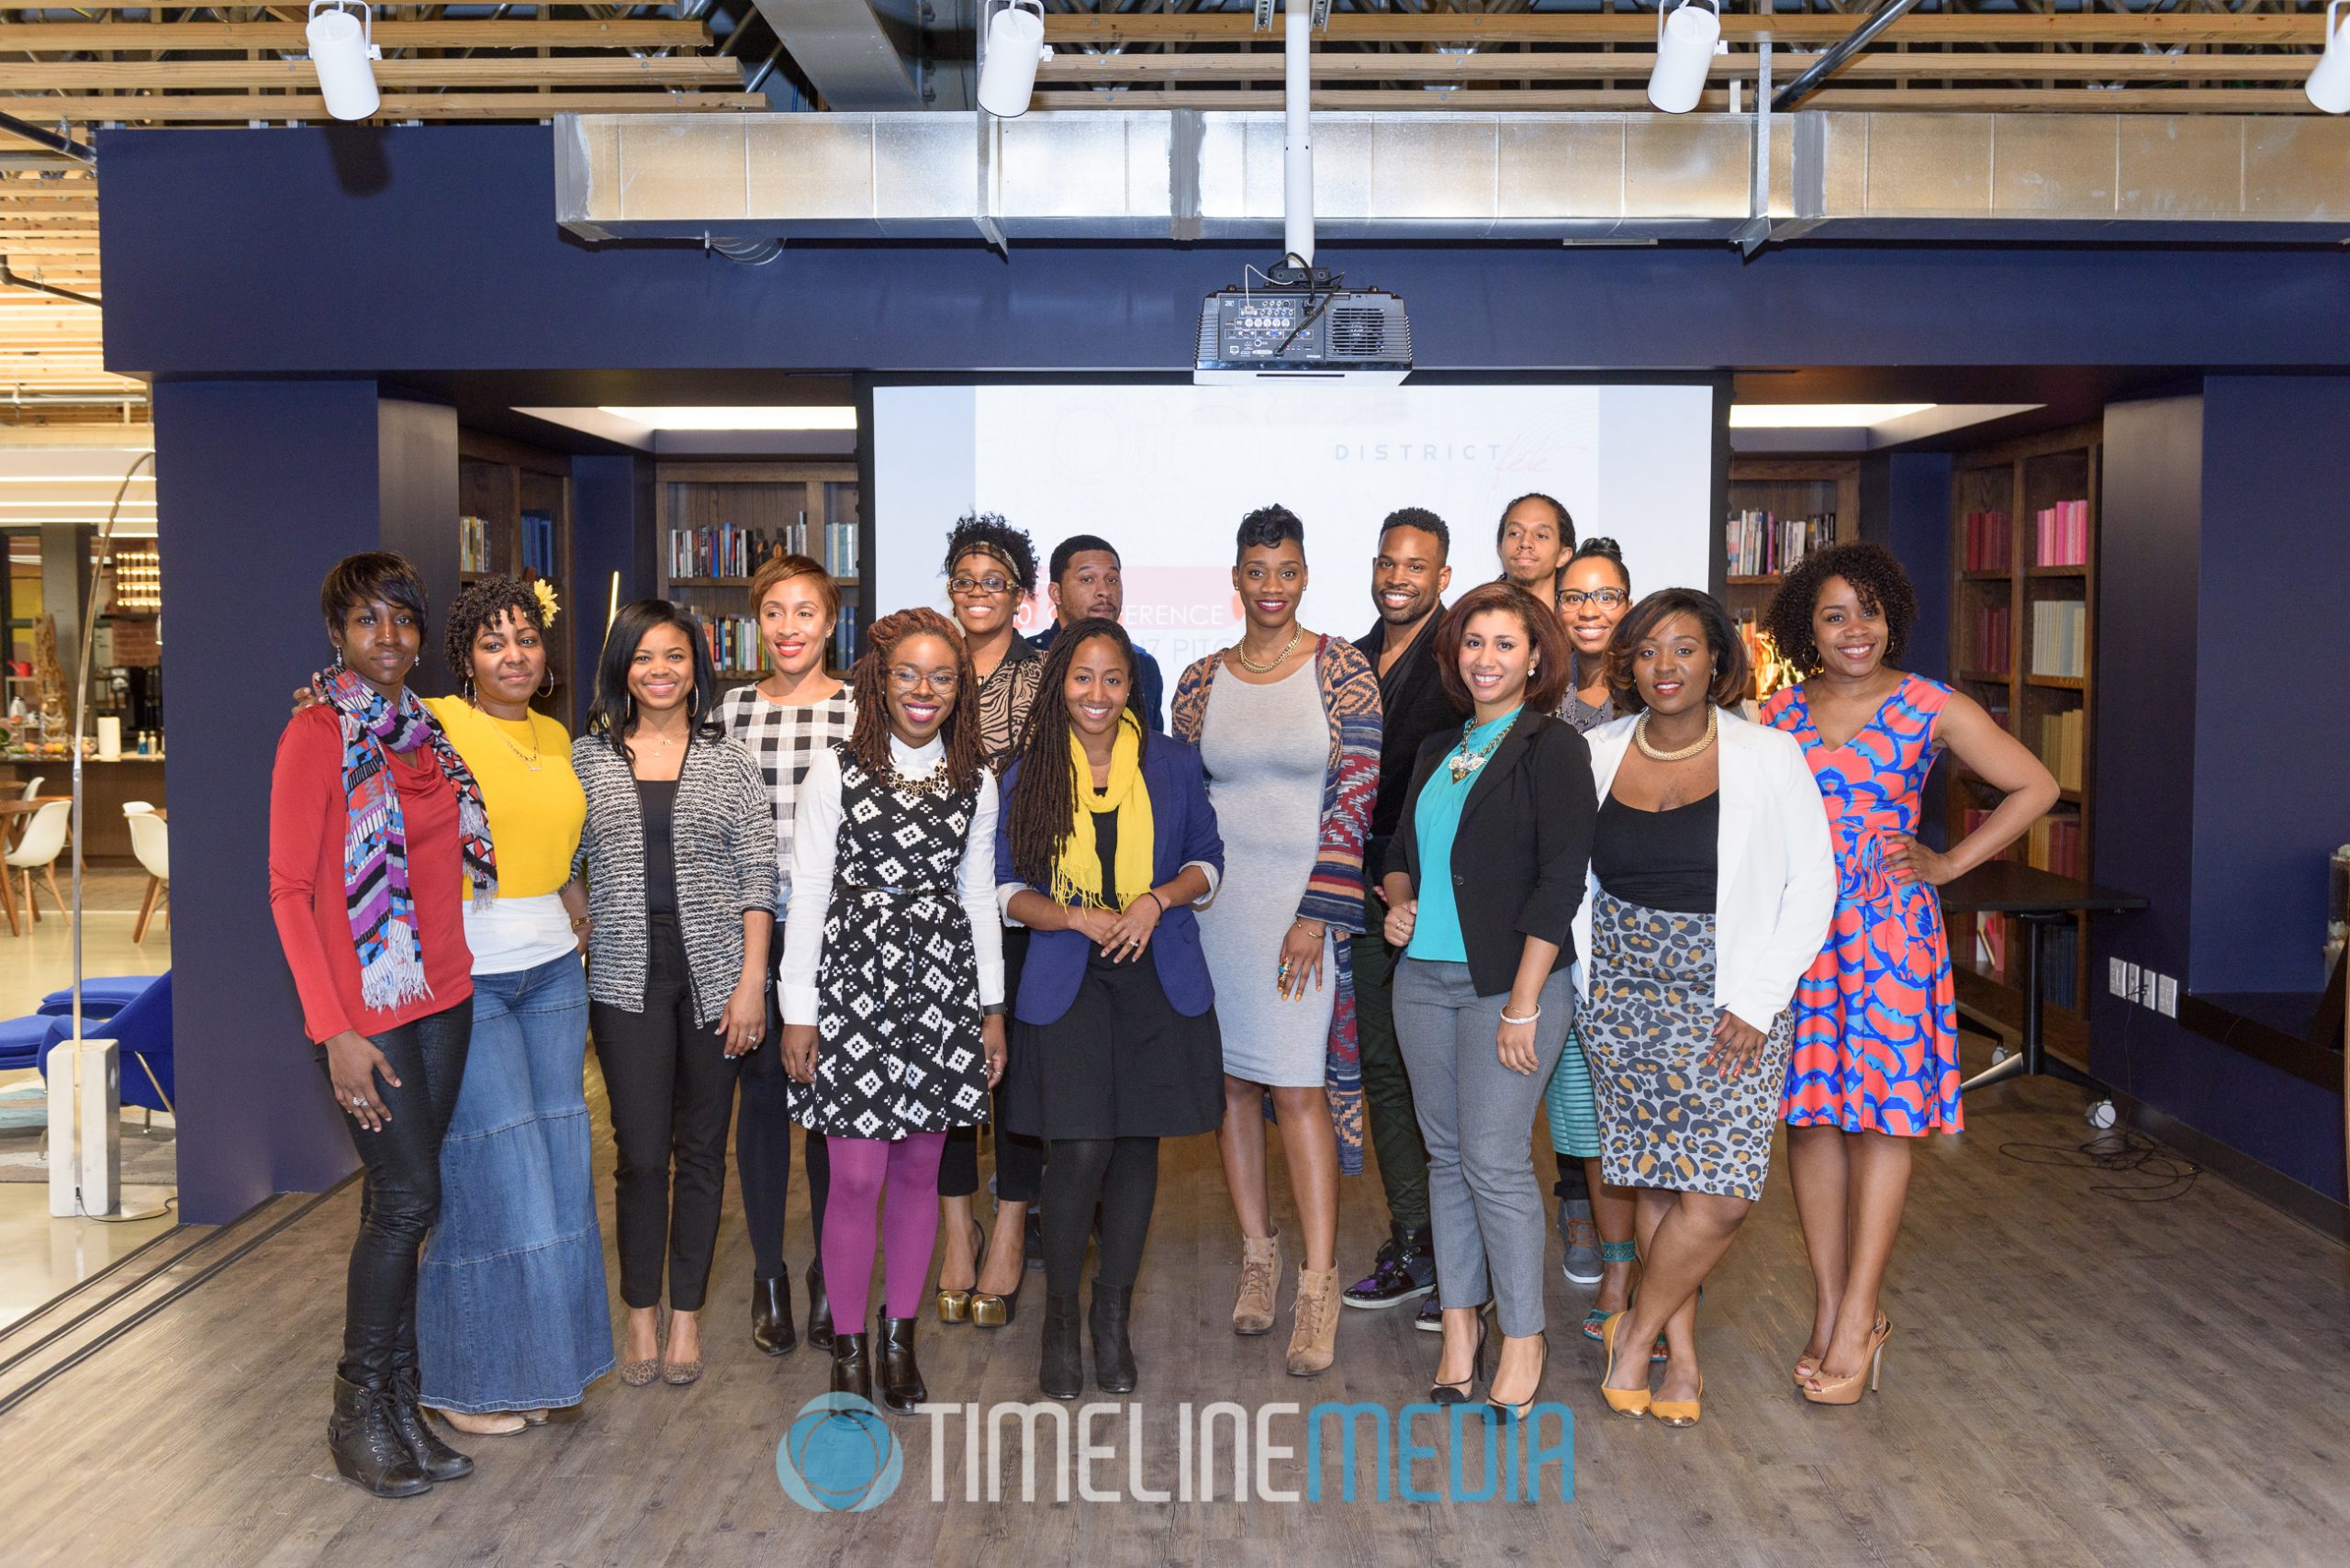 Small Biz Pitch Event Presenters and Judges ©TimeLine Media